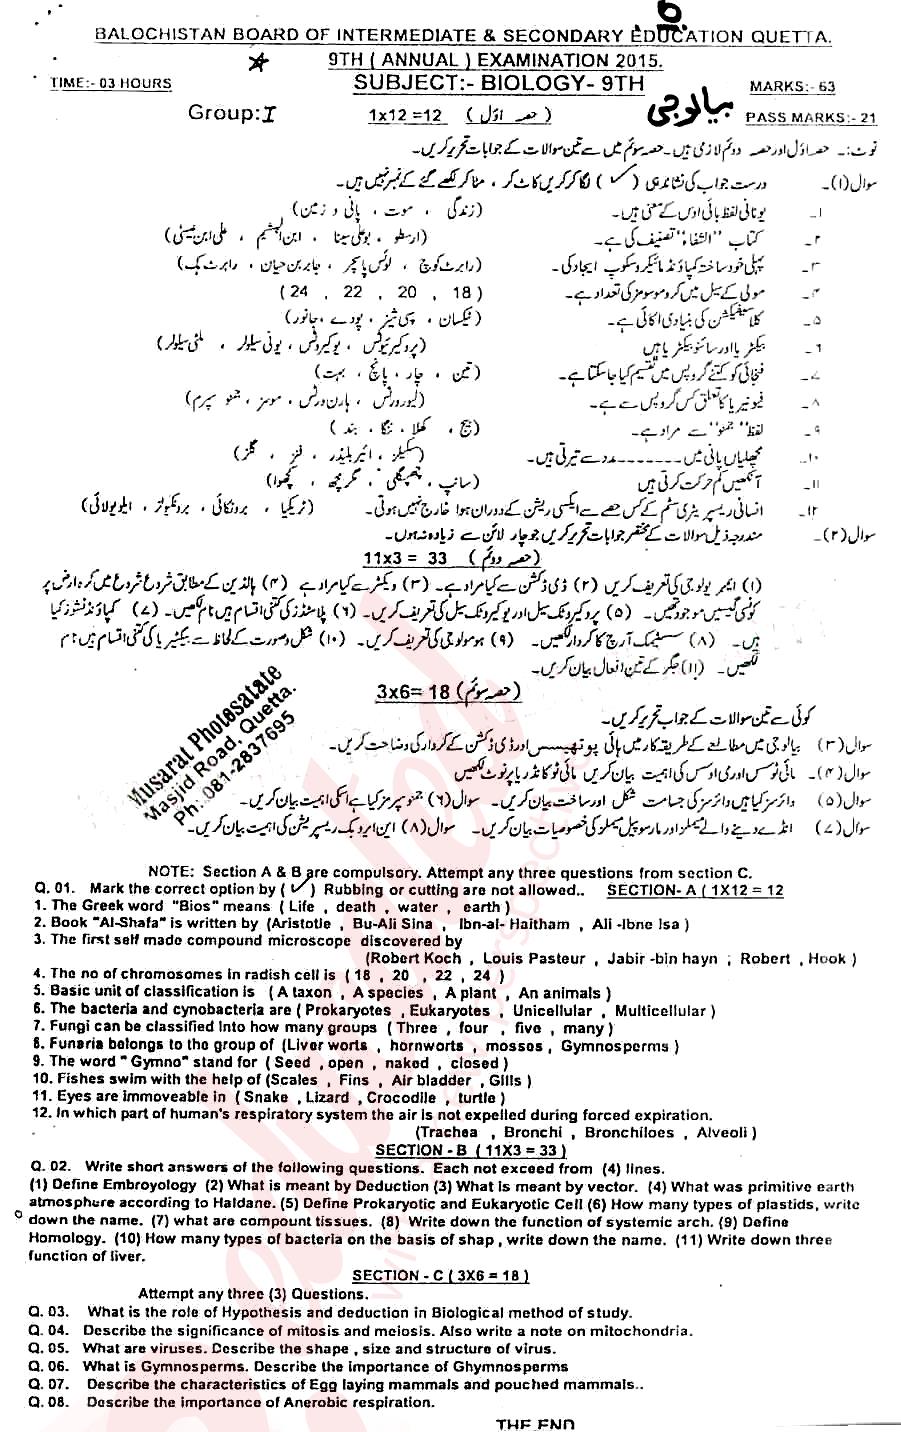 Biology 9th class Past Paper Group 1 BISE Quetta 2015